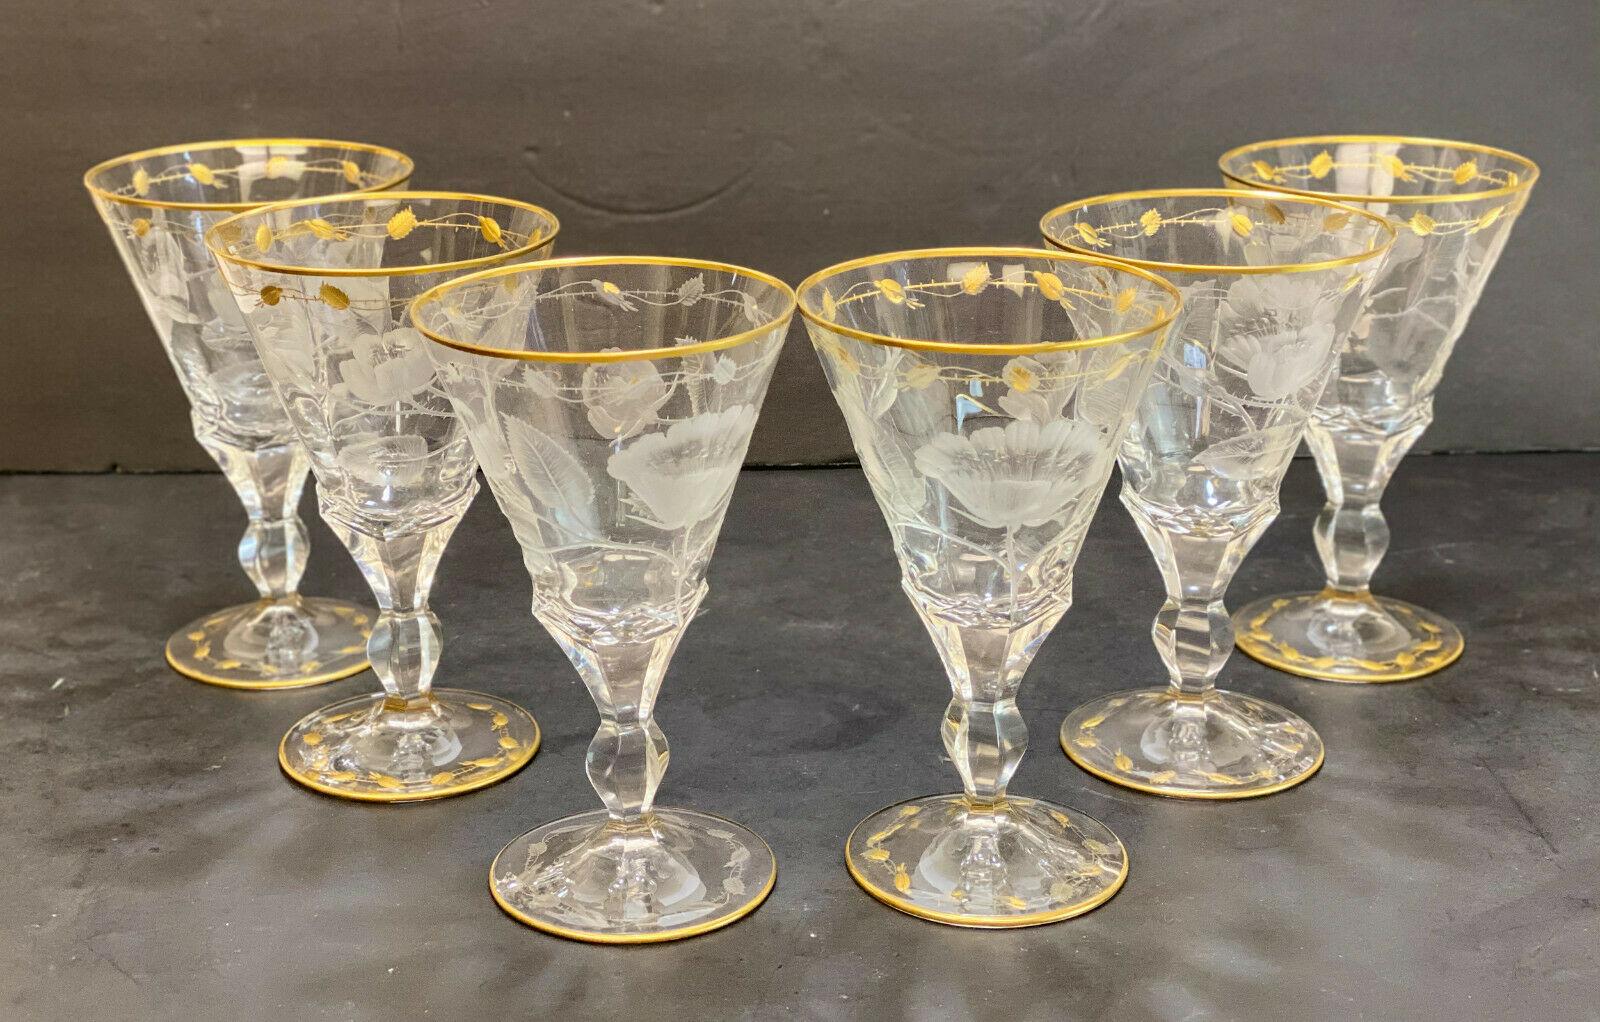 Moser Cut Glass and Gilt Drink-Ware Service Goblets in Paula Service for 6 In Good Condition For Sale In Pasadena, CA